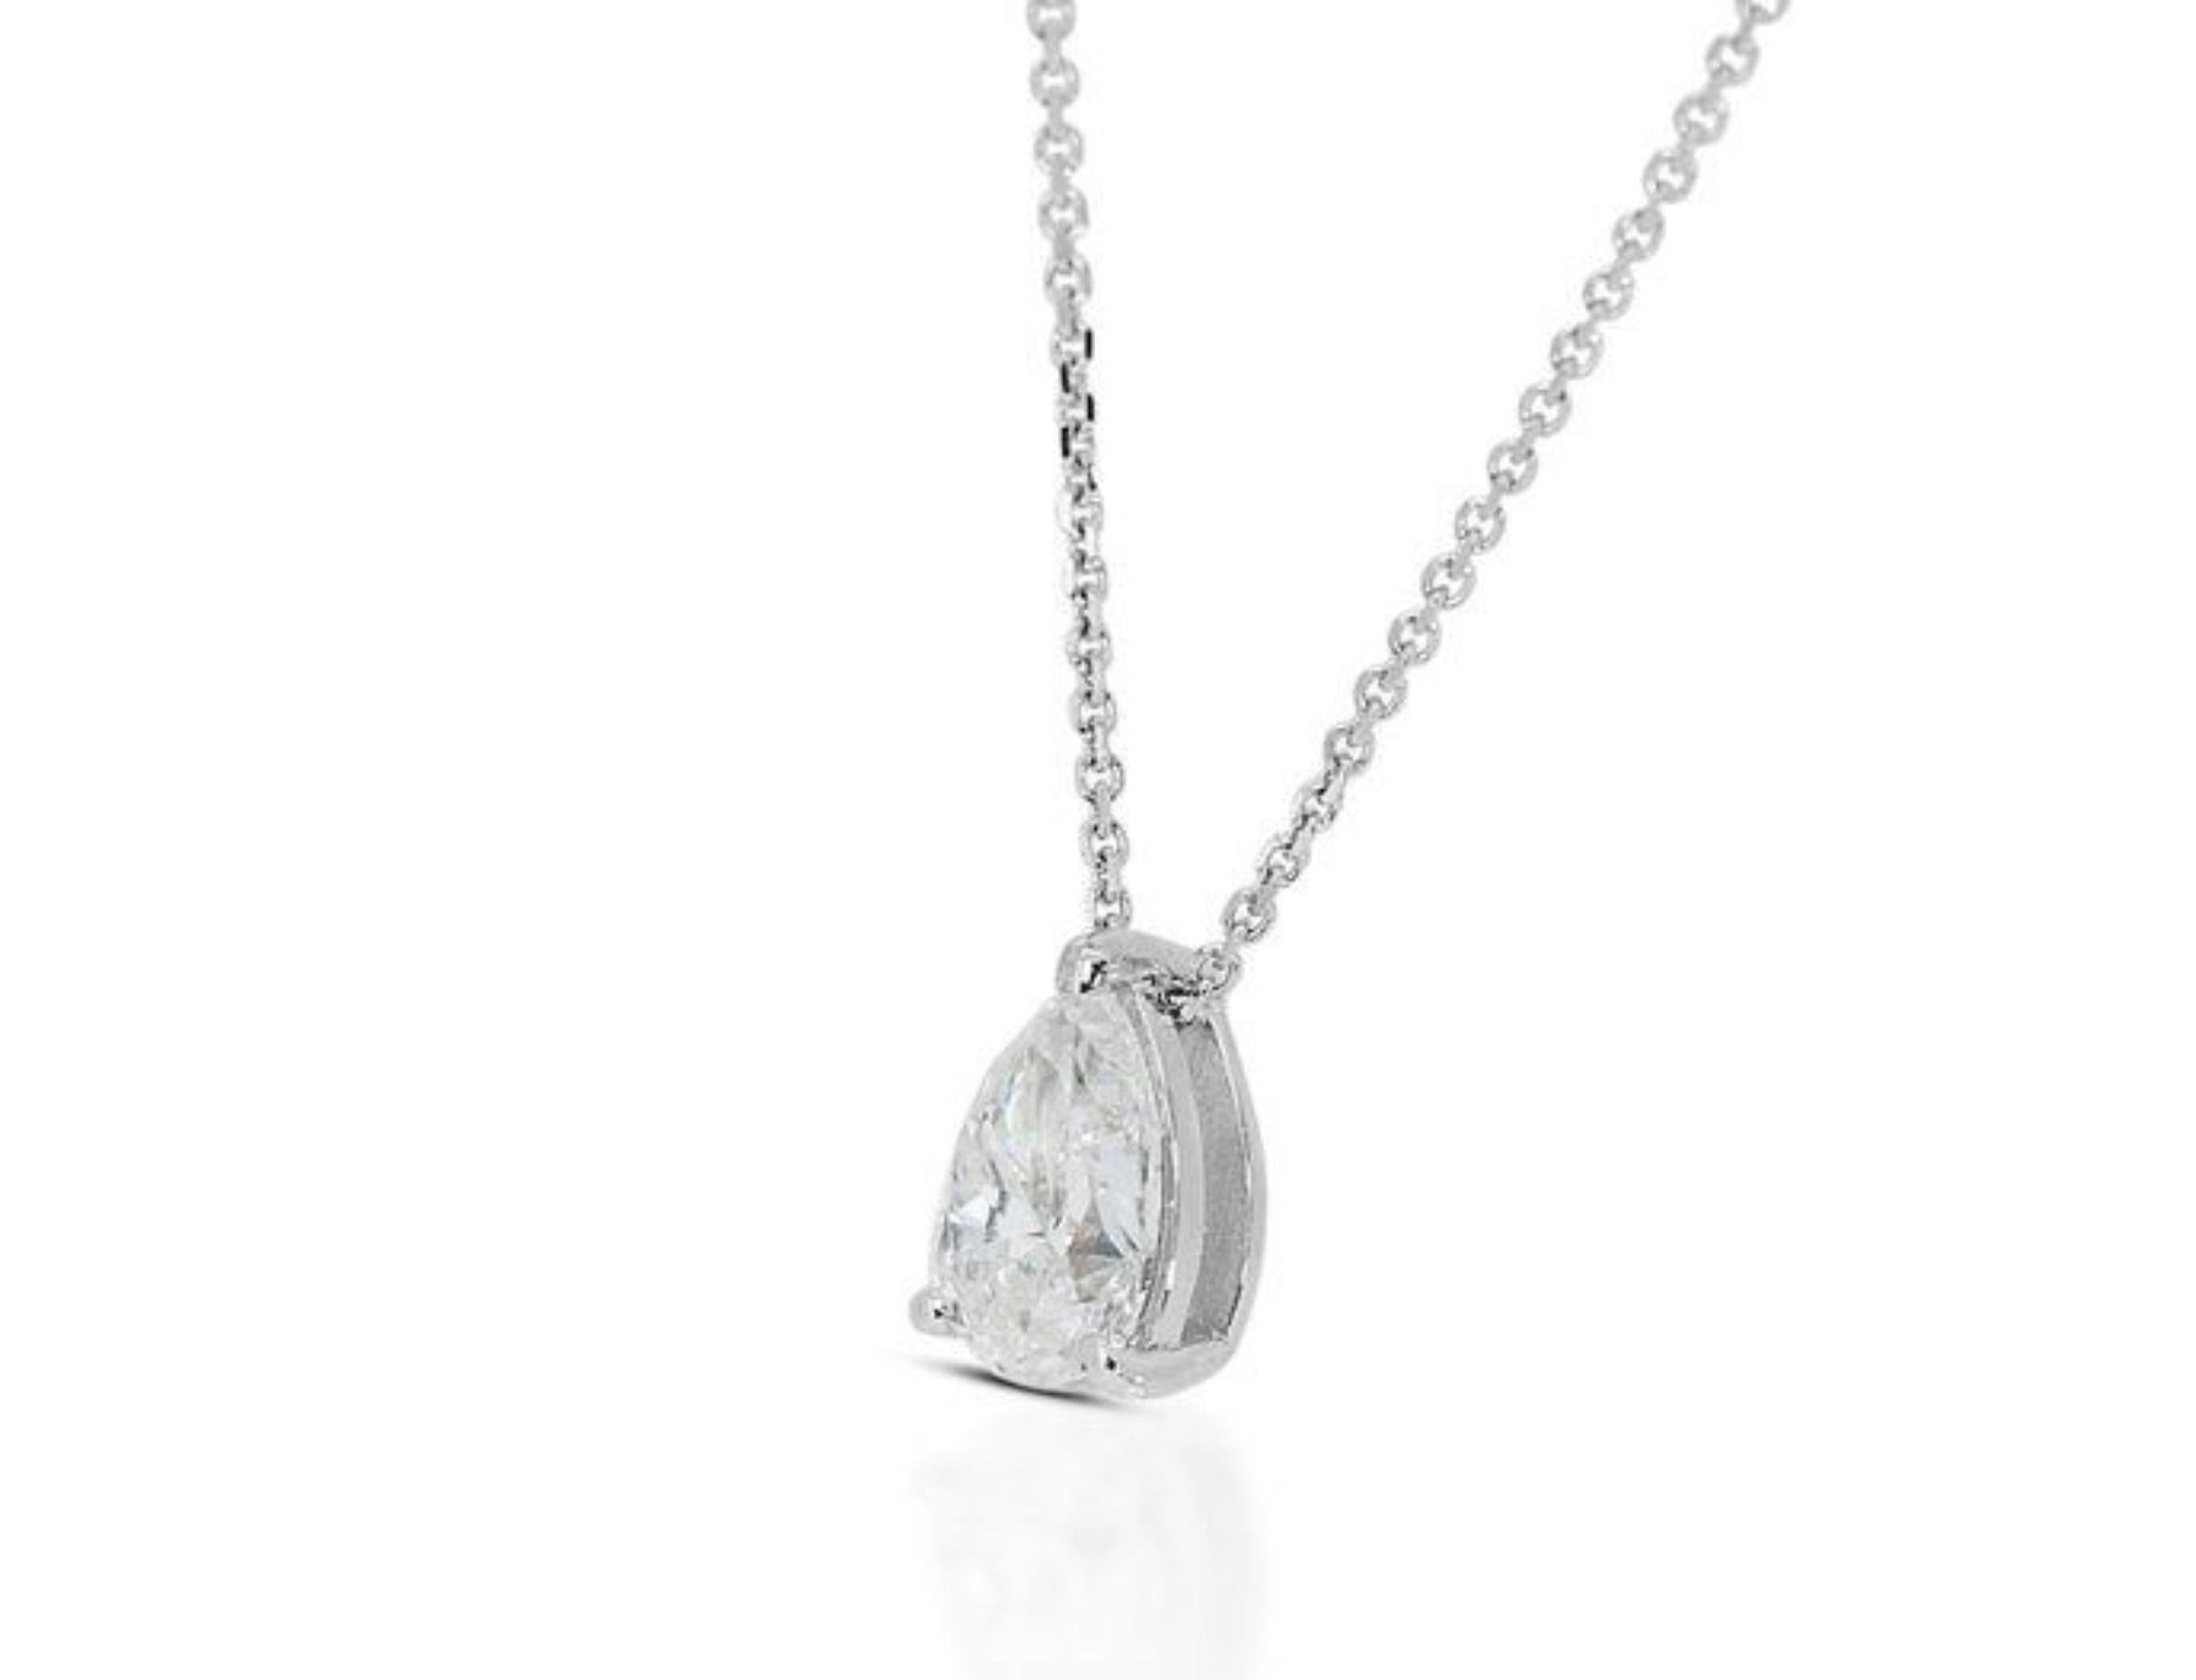 Shimmering 0.70ct Pear Brilliant Diamond Necklace in 18K White Gold In New Condition For Sale In רמת גן, IL